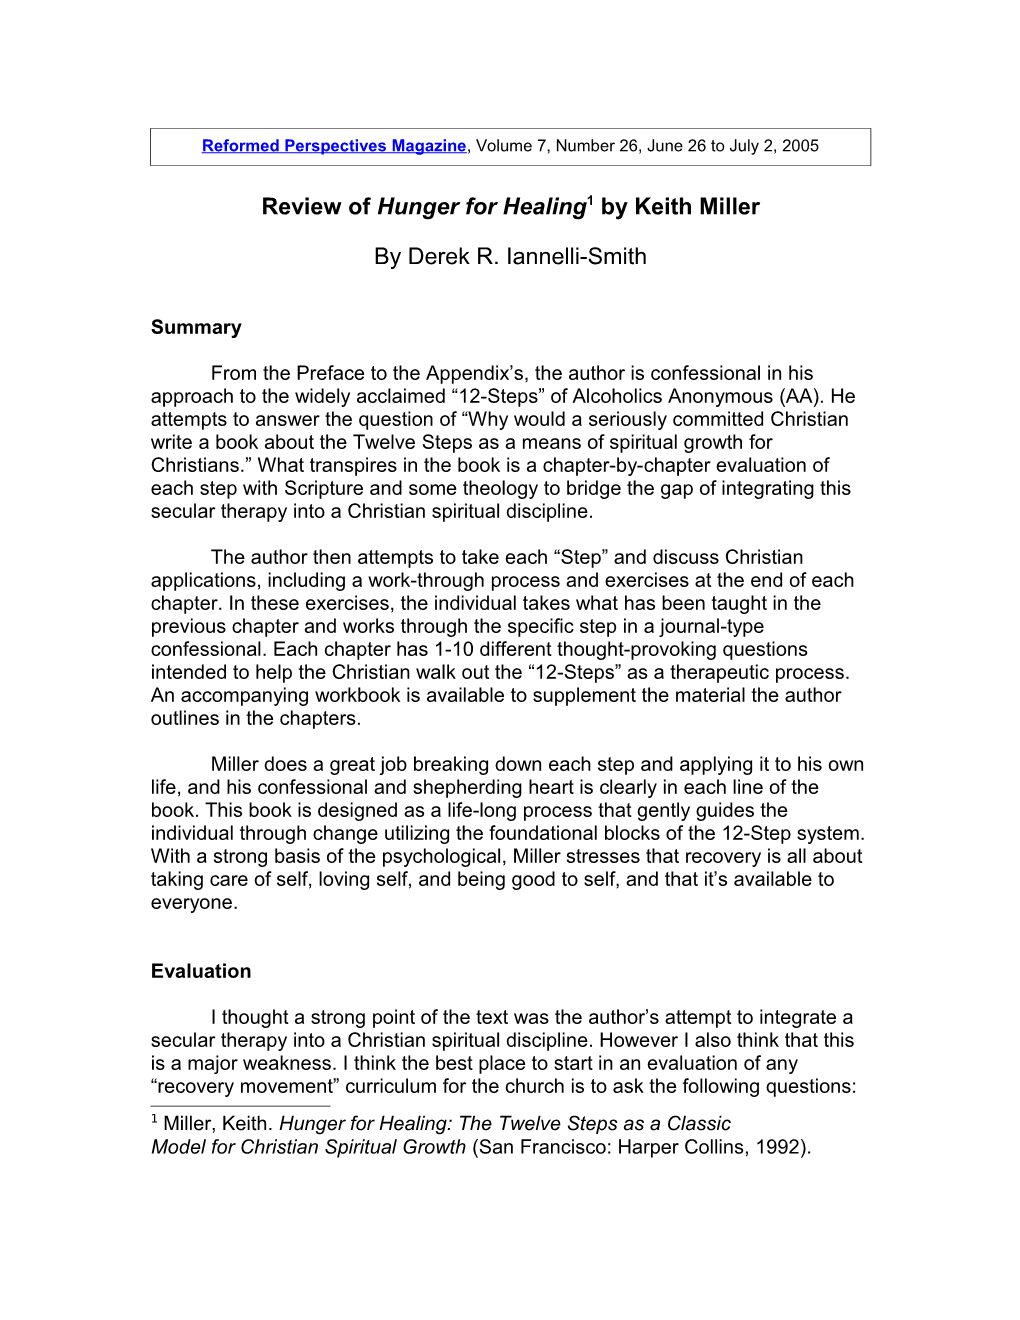 Review of Hunger for Healing 1 by Keith Miller